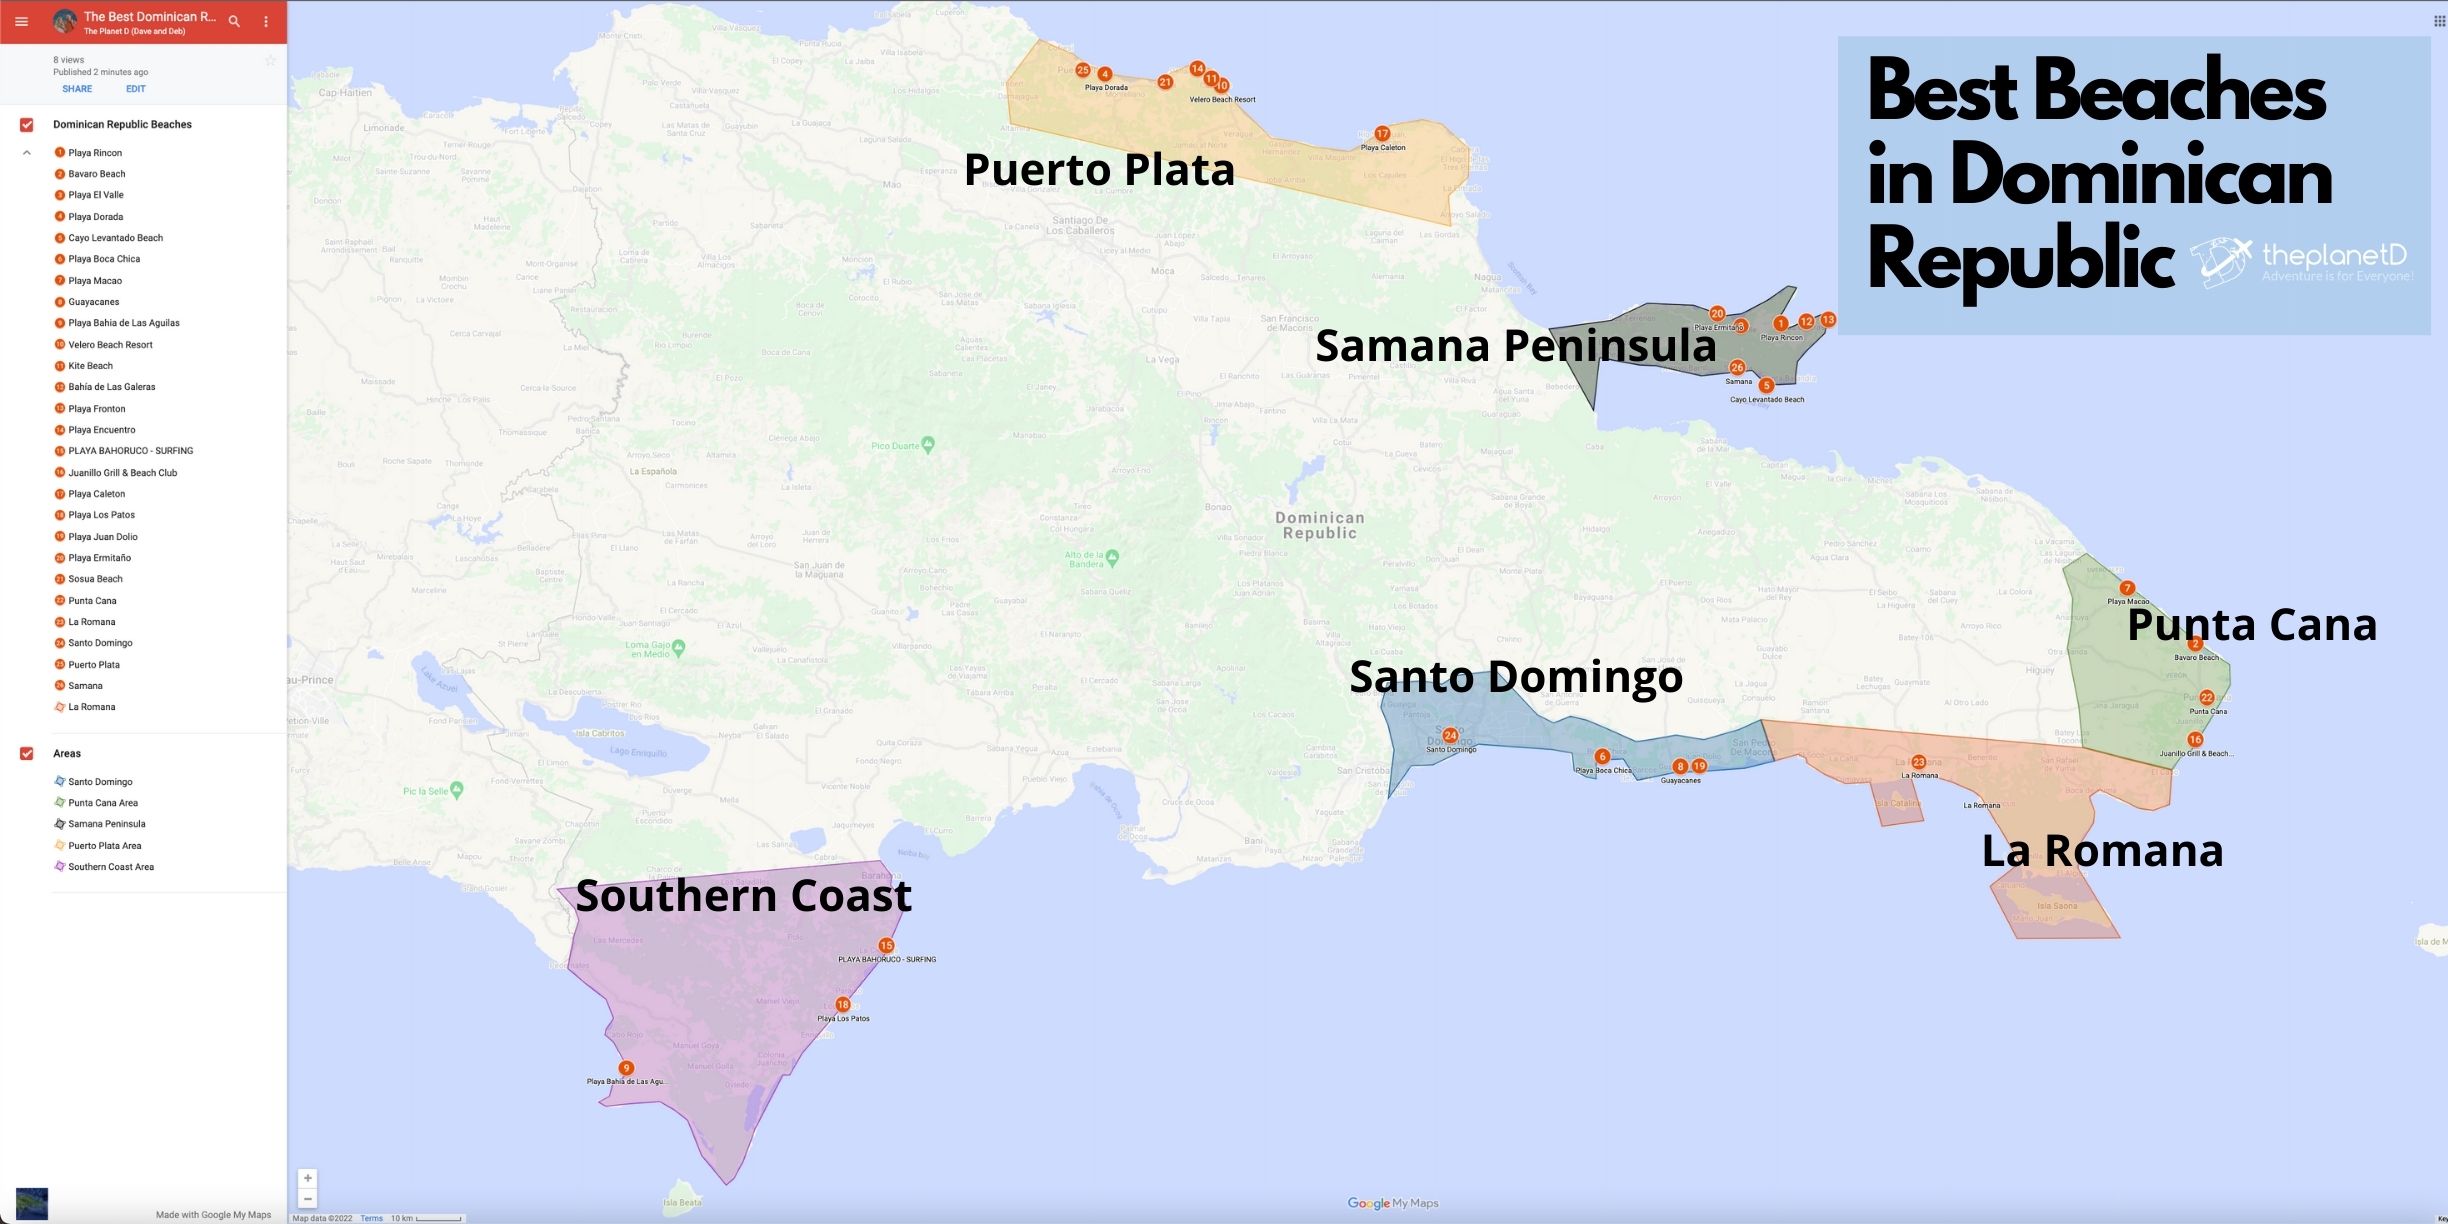 Map of Best Beaches in the Dominican Republic